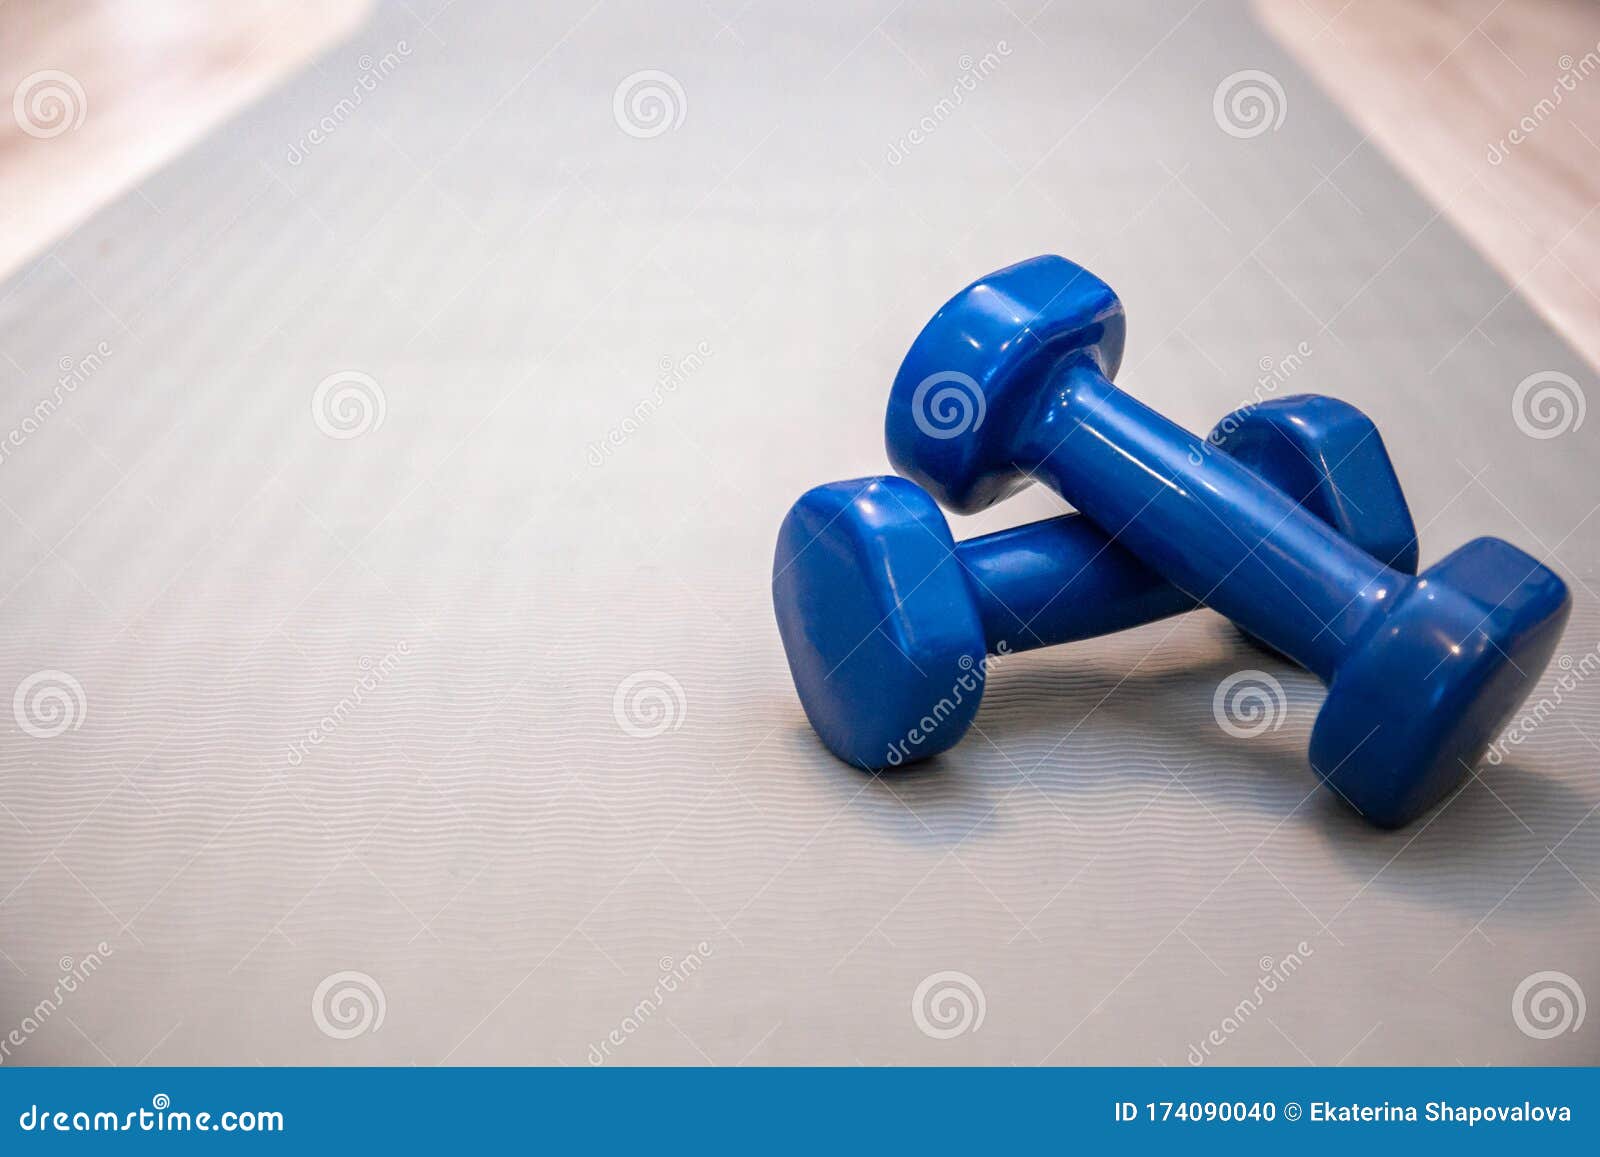 Two Dumbbells Close-up on a Gray Training Mat Stock Photo - Image of ...